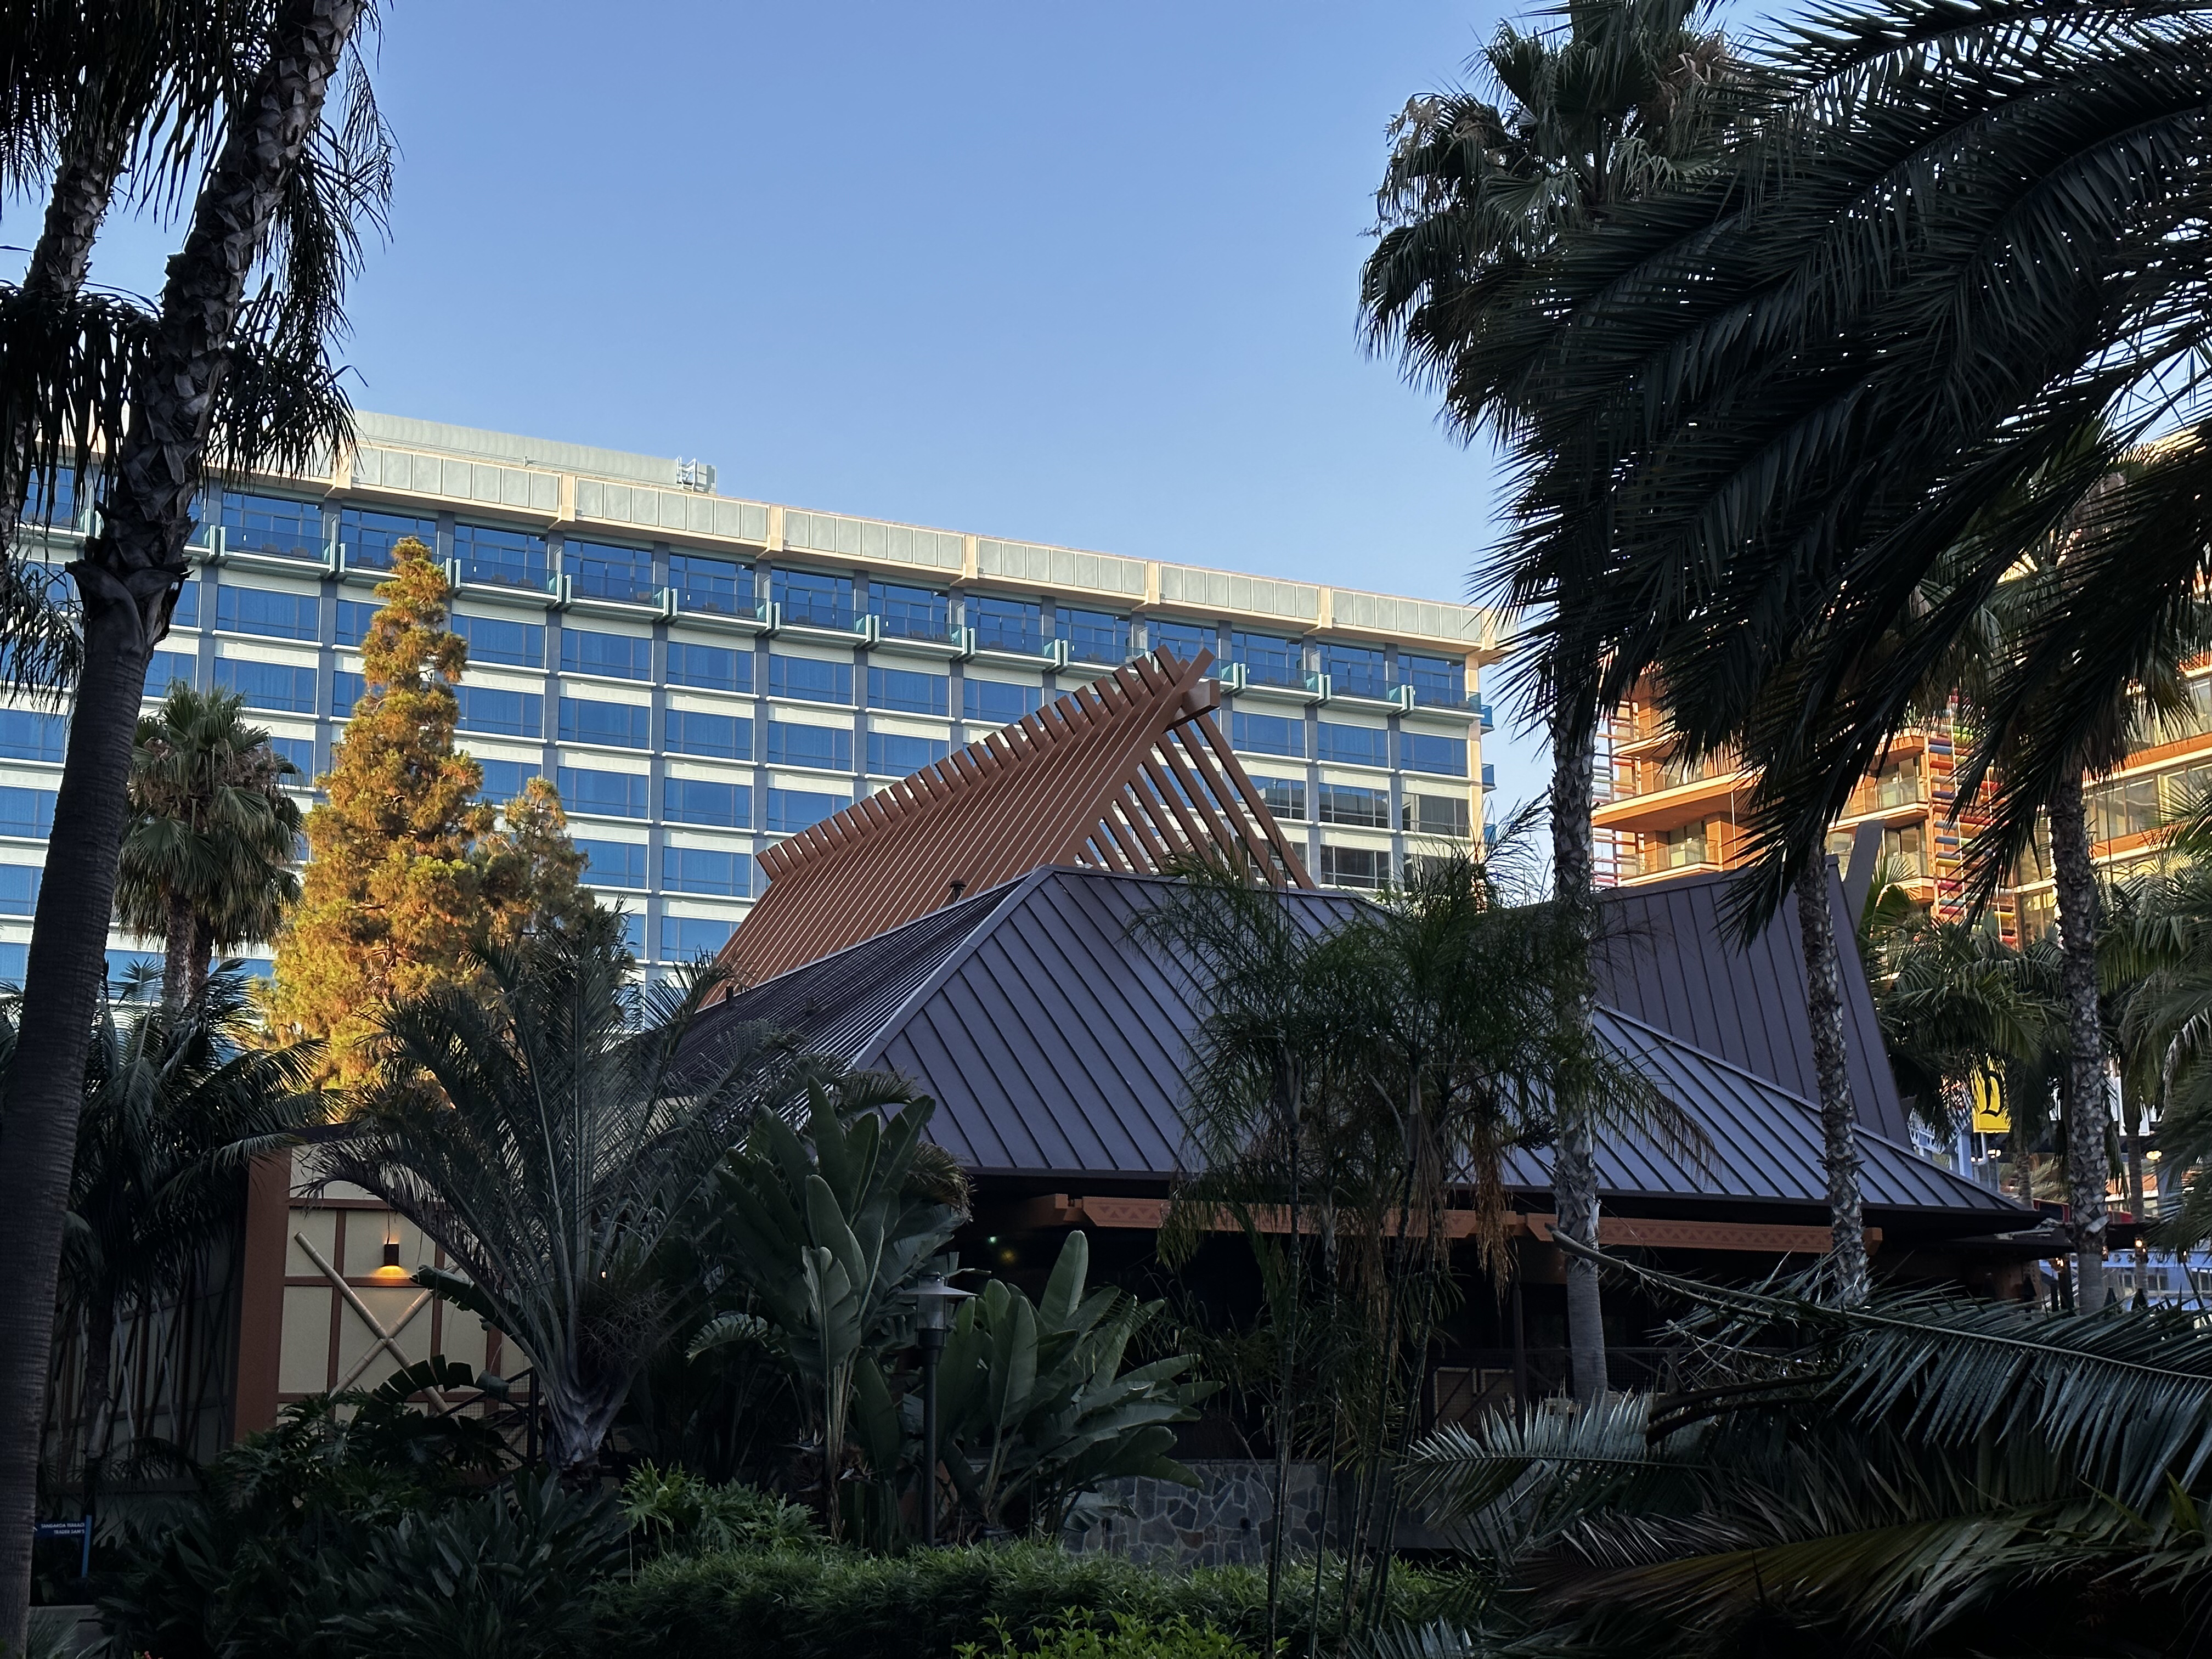 The Disneyland Hotel resort, including Trader Sam’s, very early in the morning.